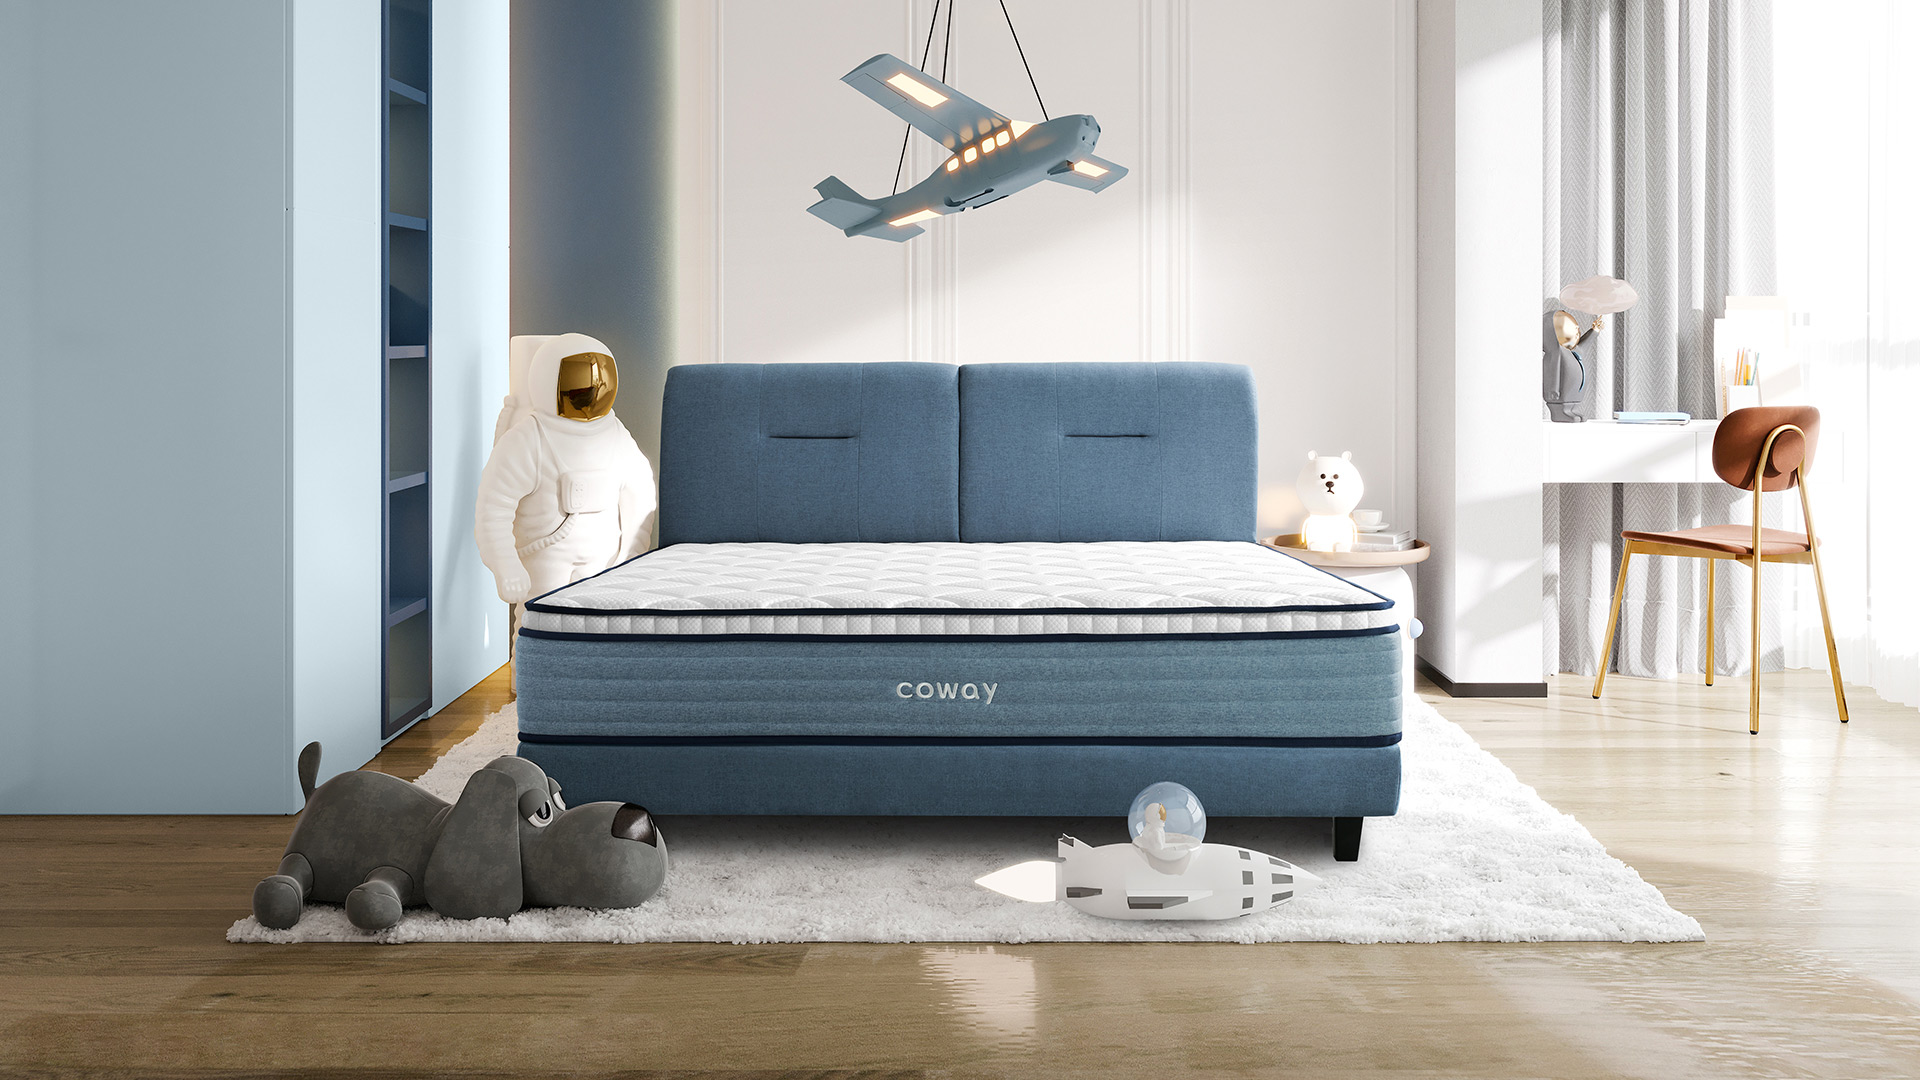 Coway Eco Lite Series Mattress - Fits In Any Kind Of Room Design